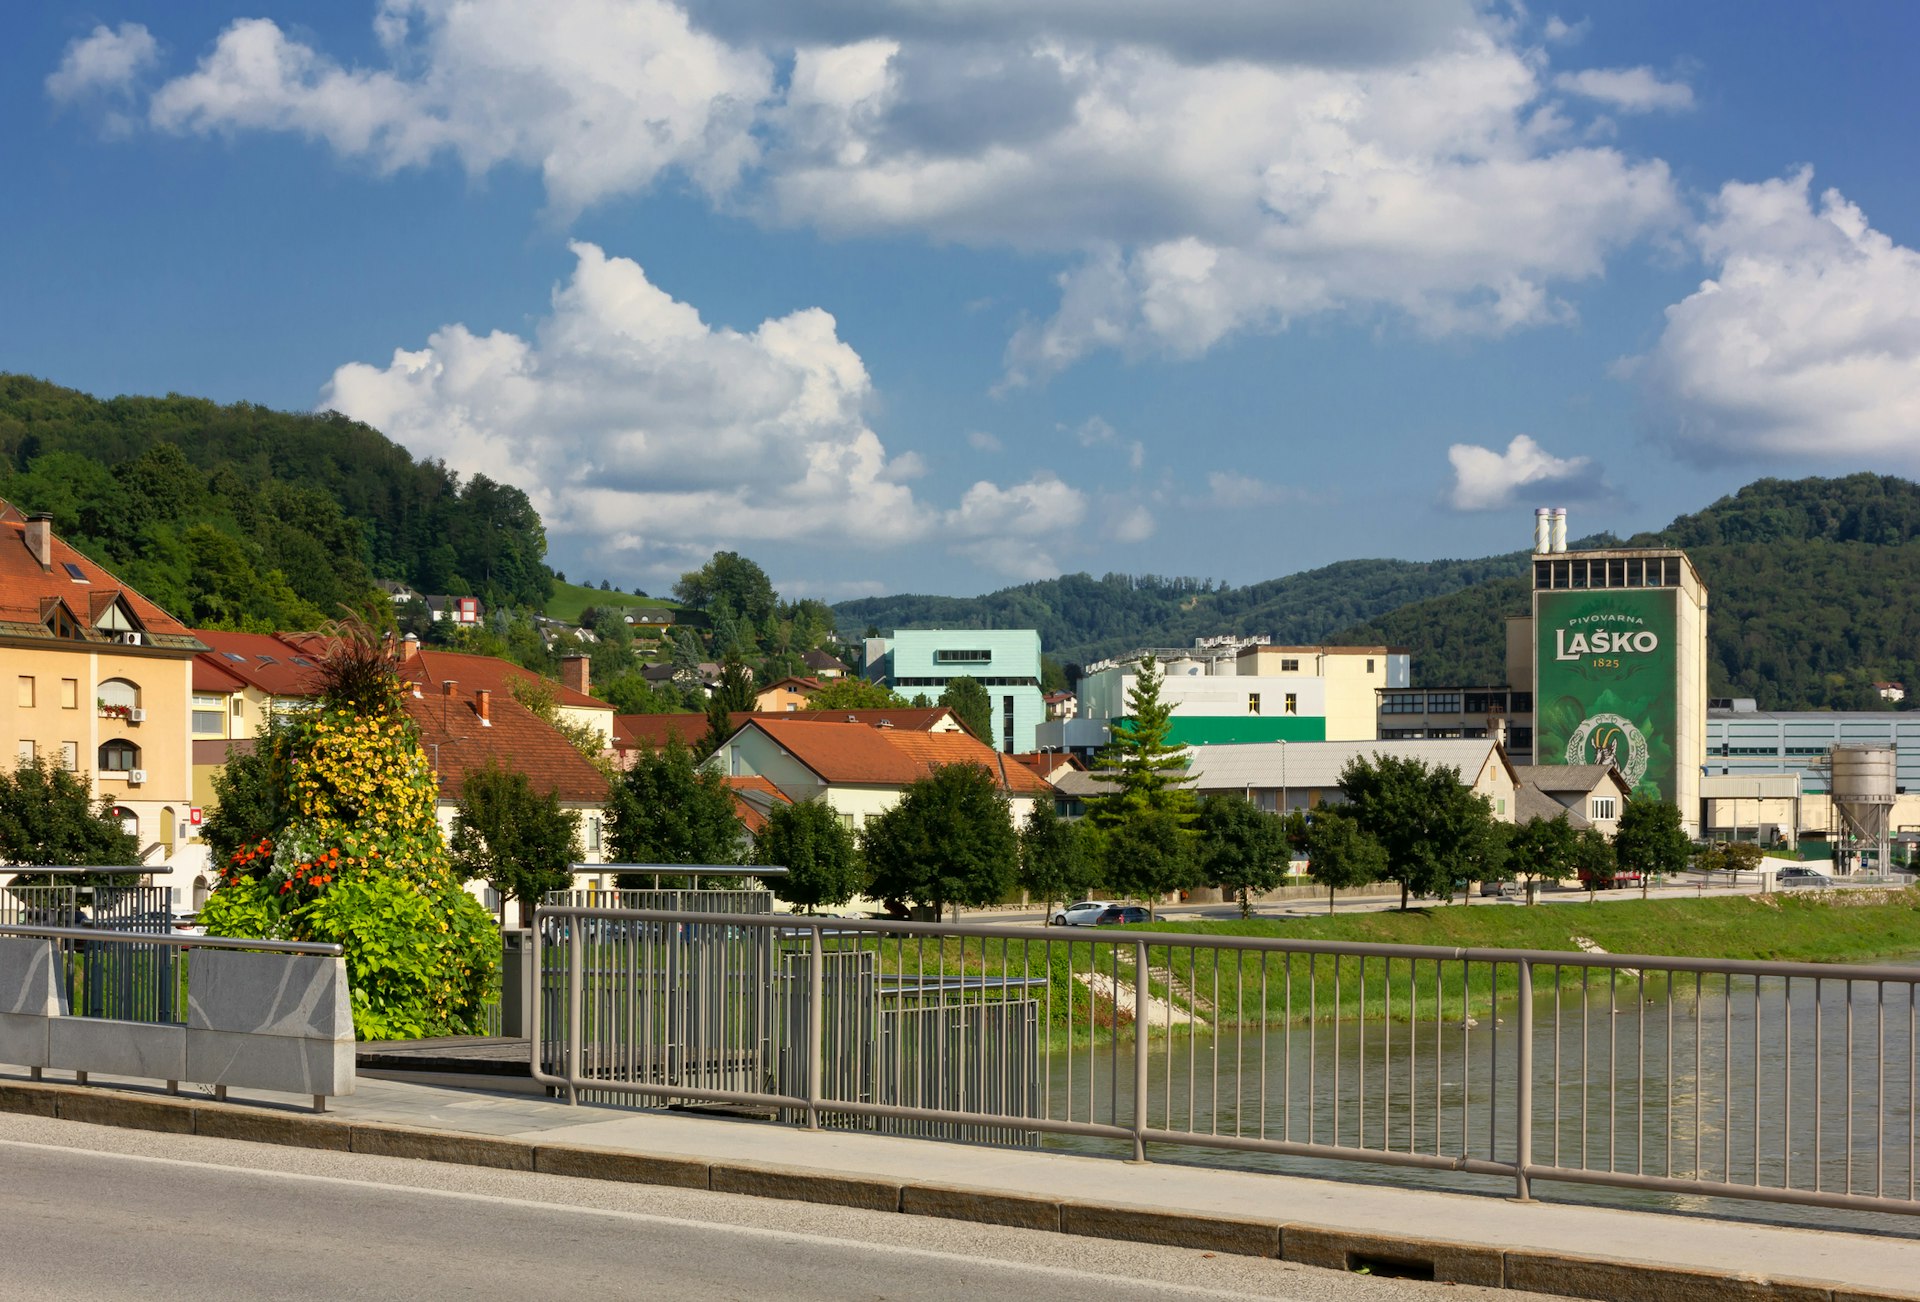 View of Laško, Slovenia and its brewery